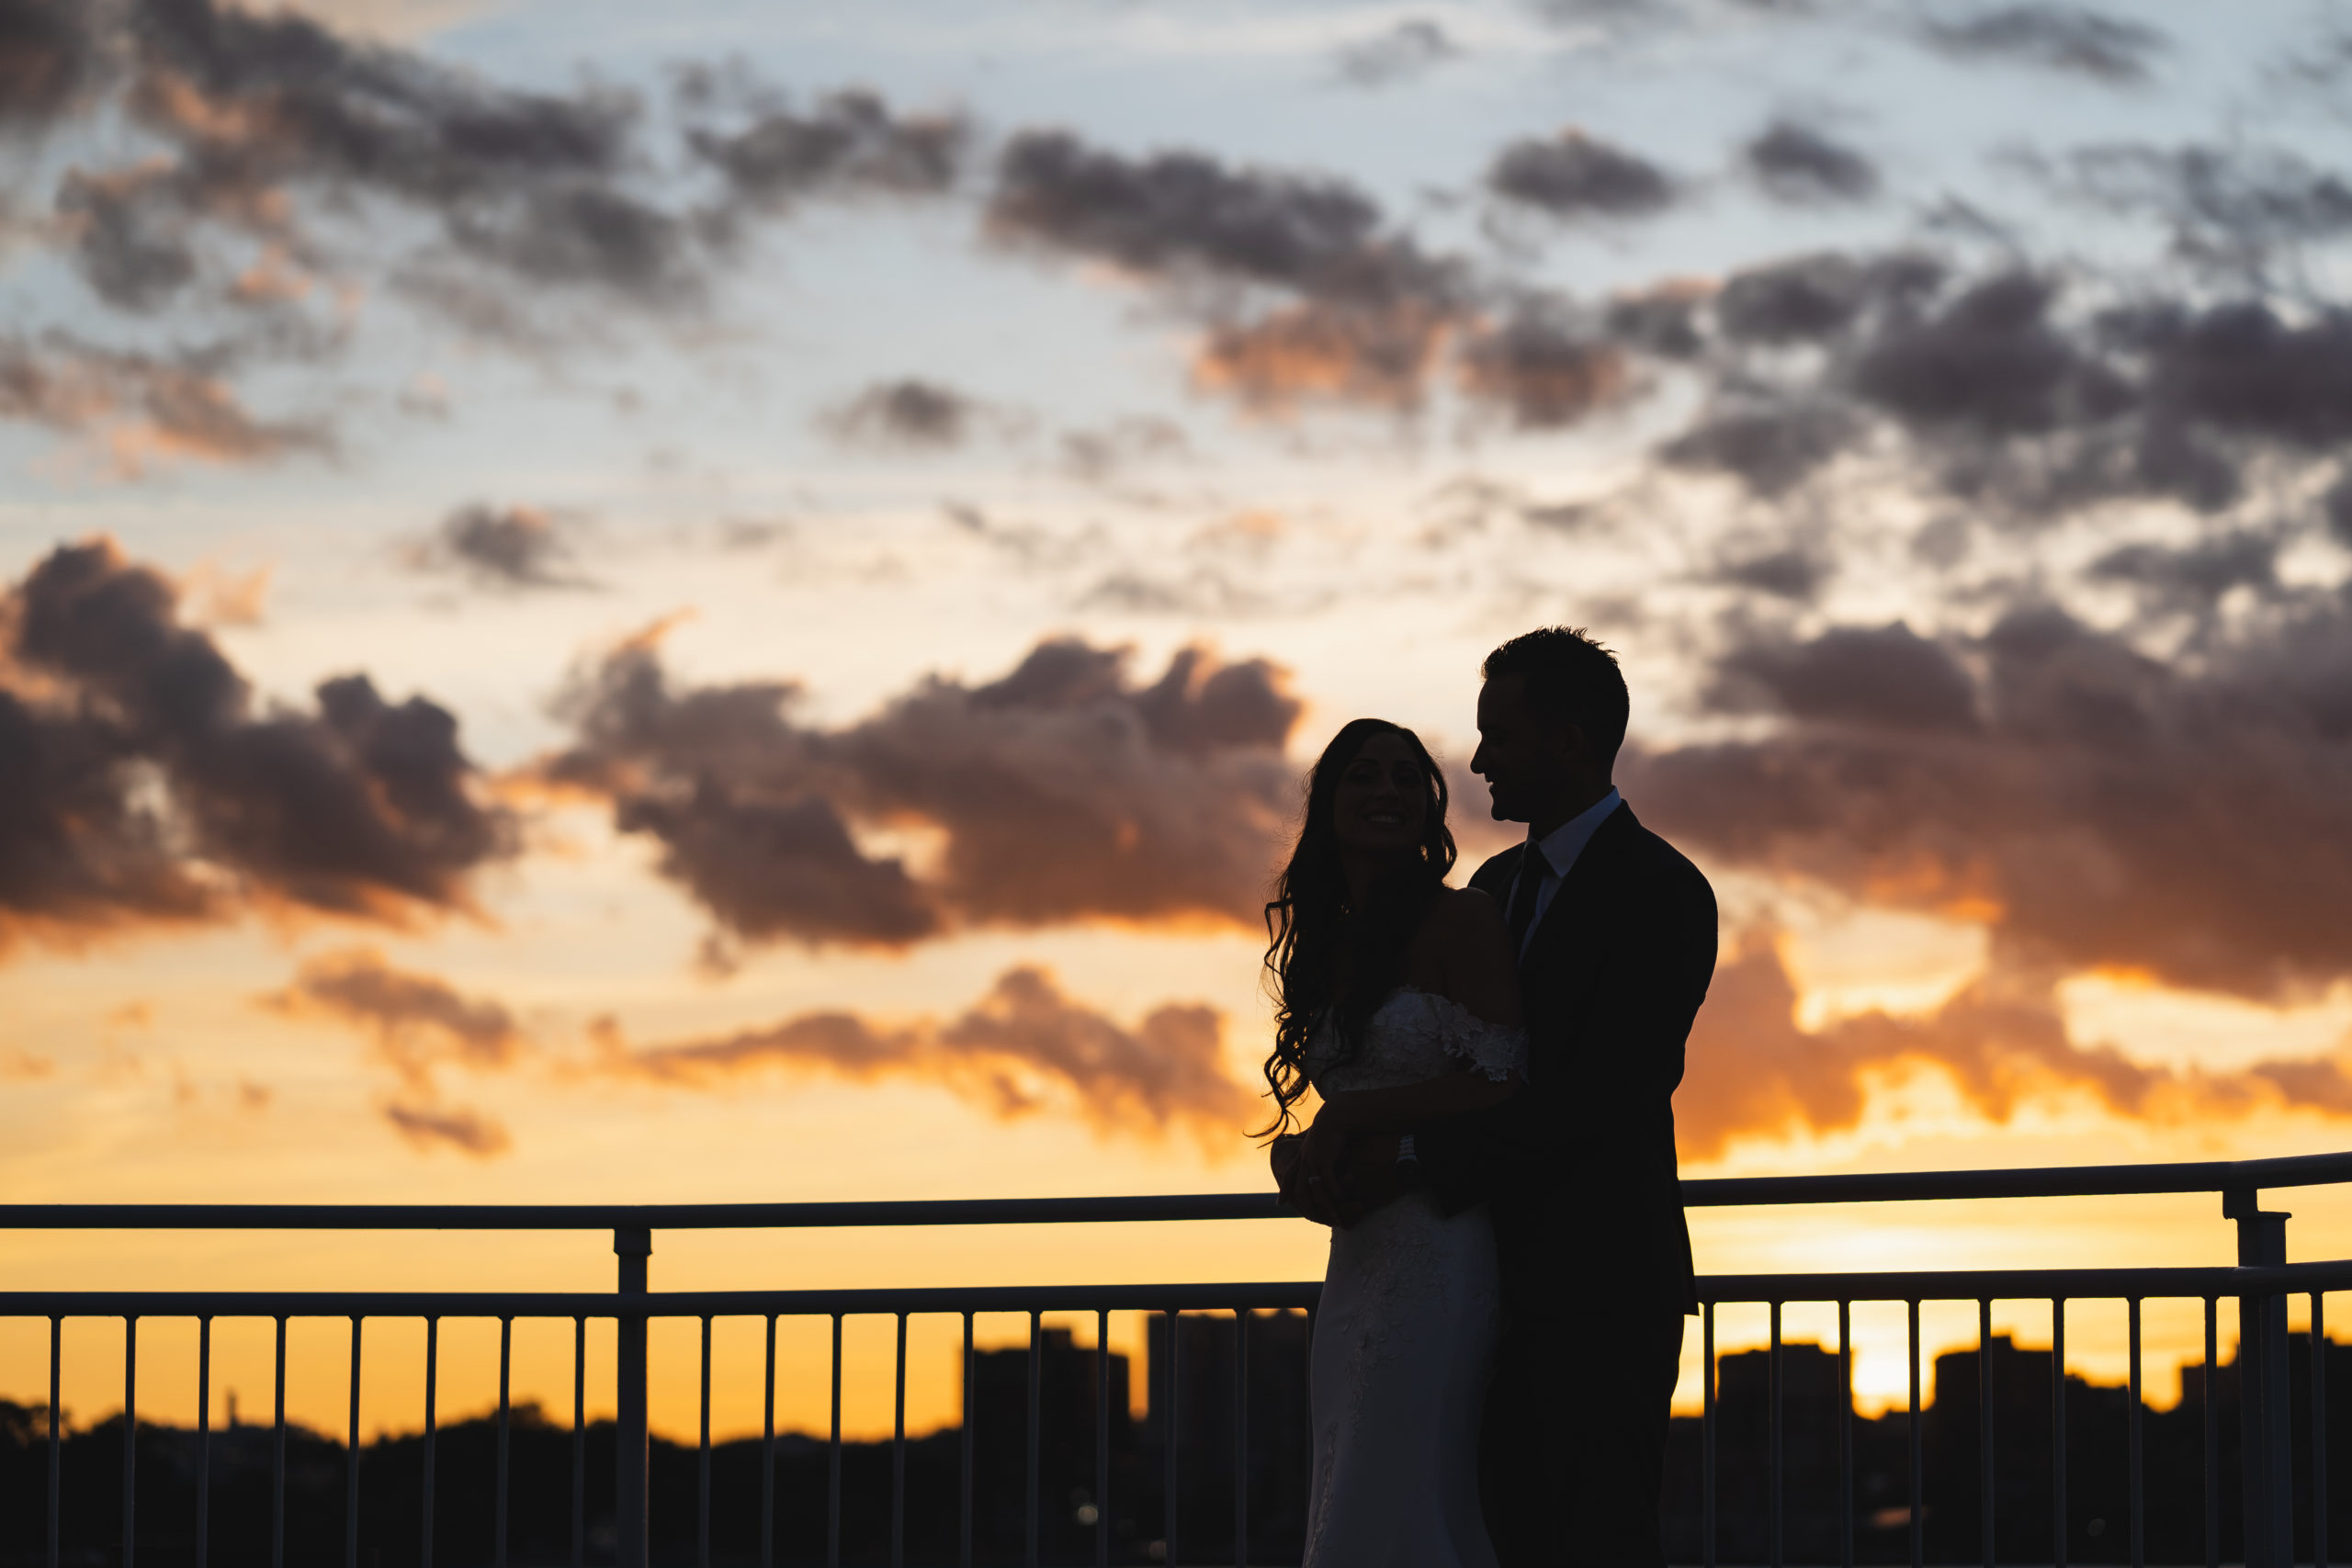 Bride and Groom at the lighthouse veranda over sunset